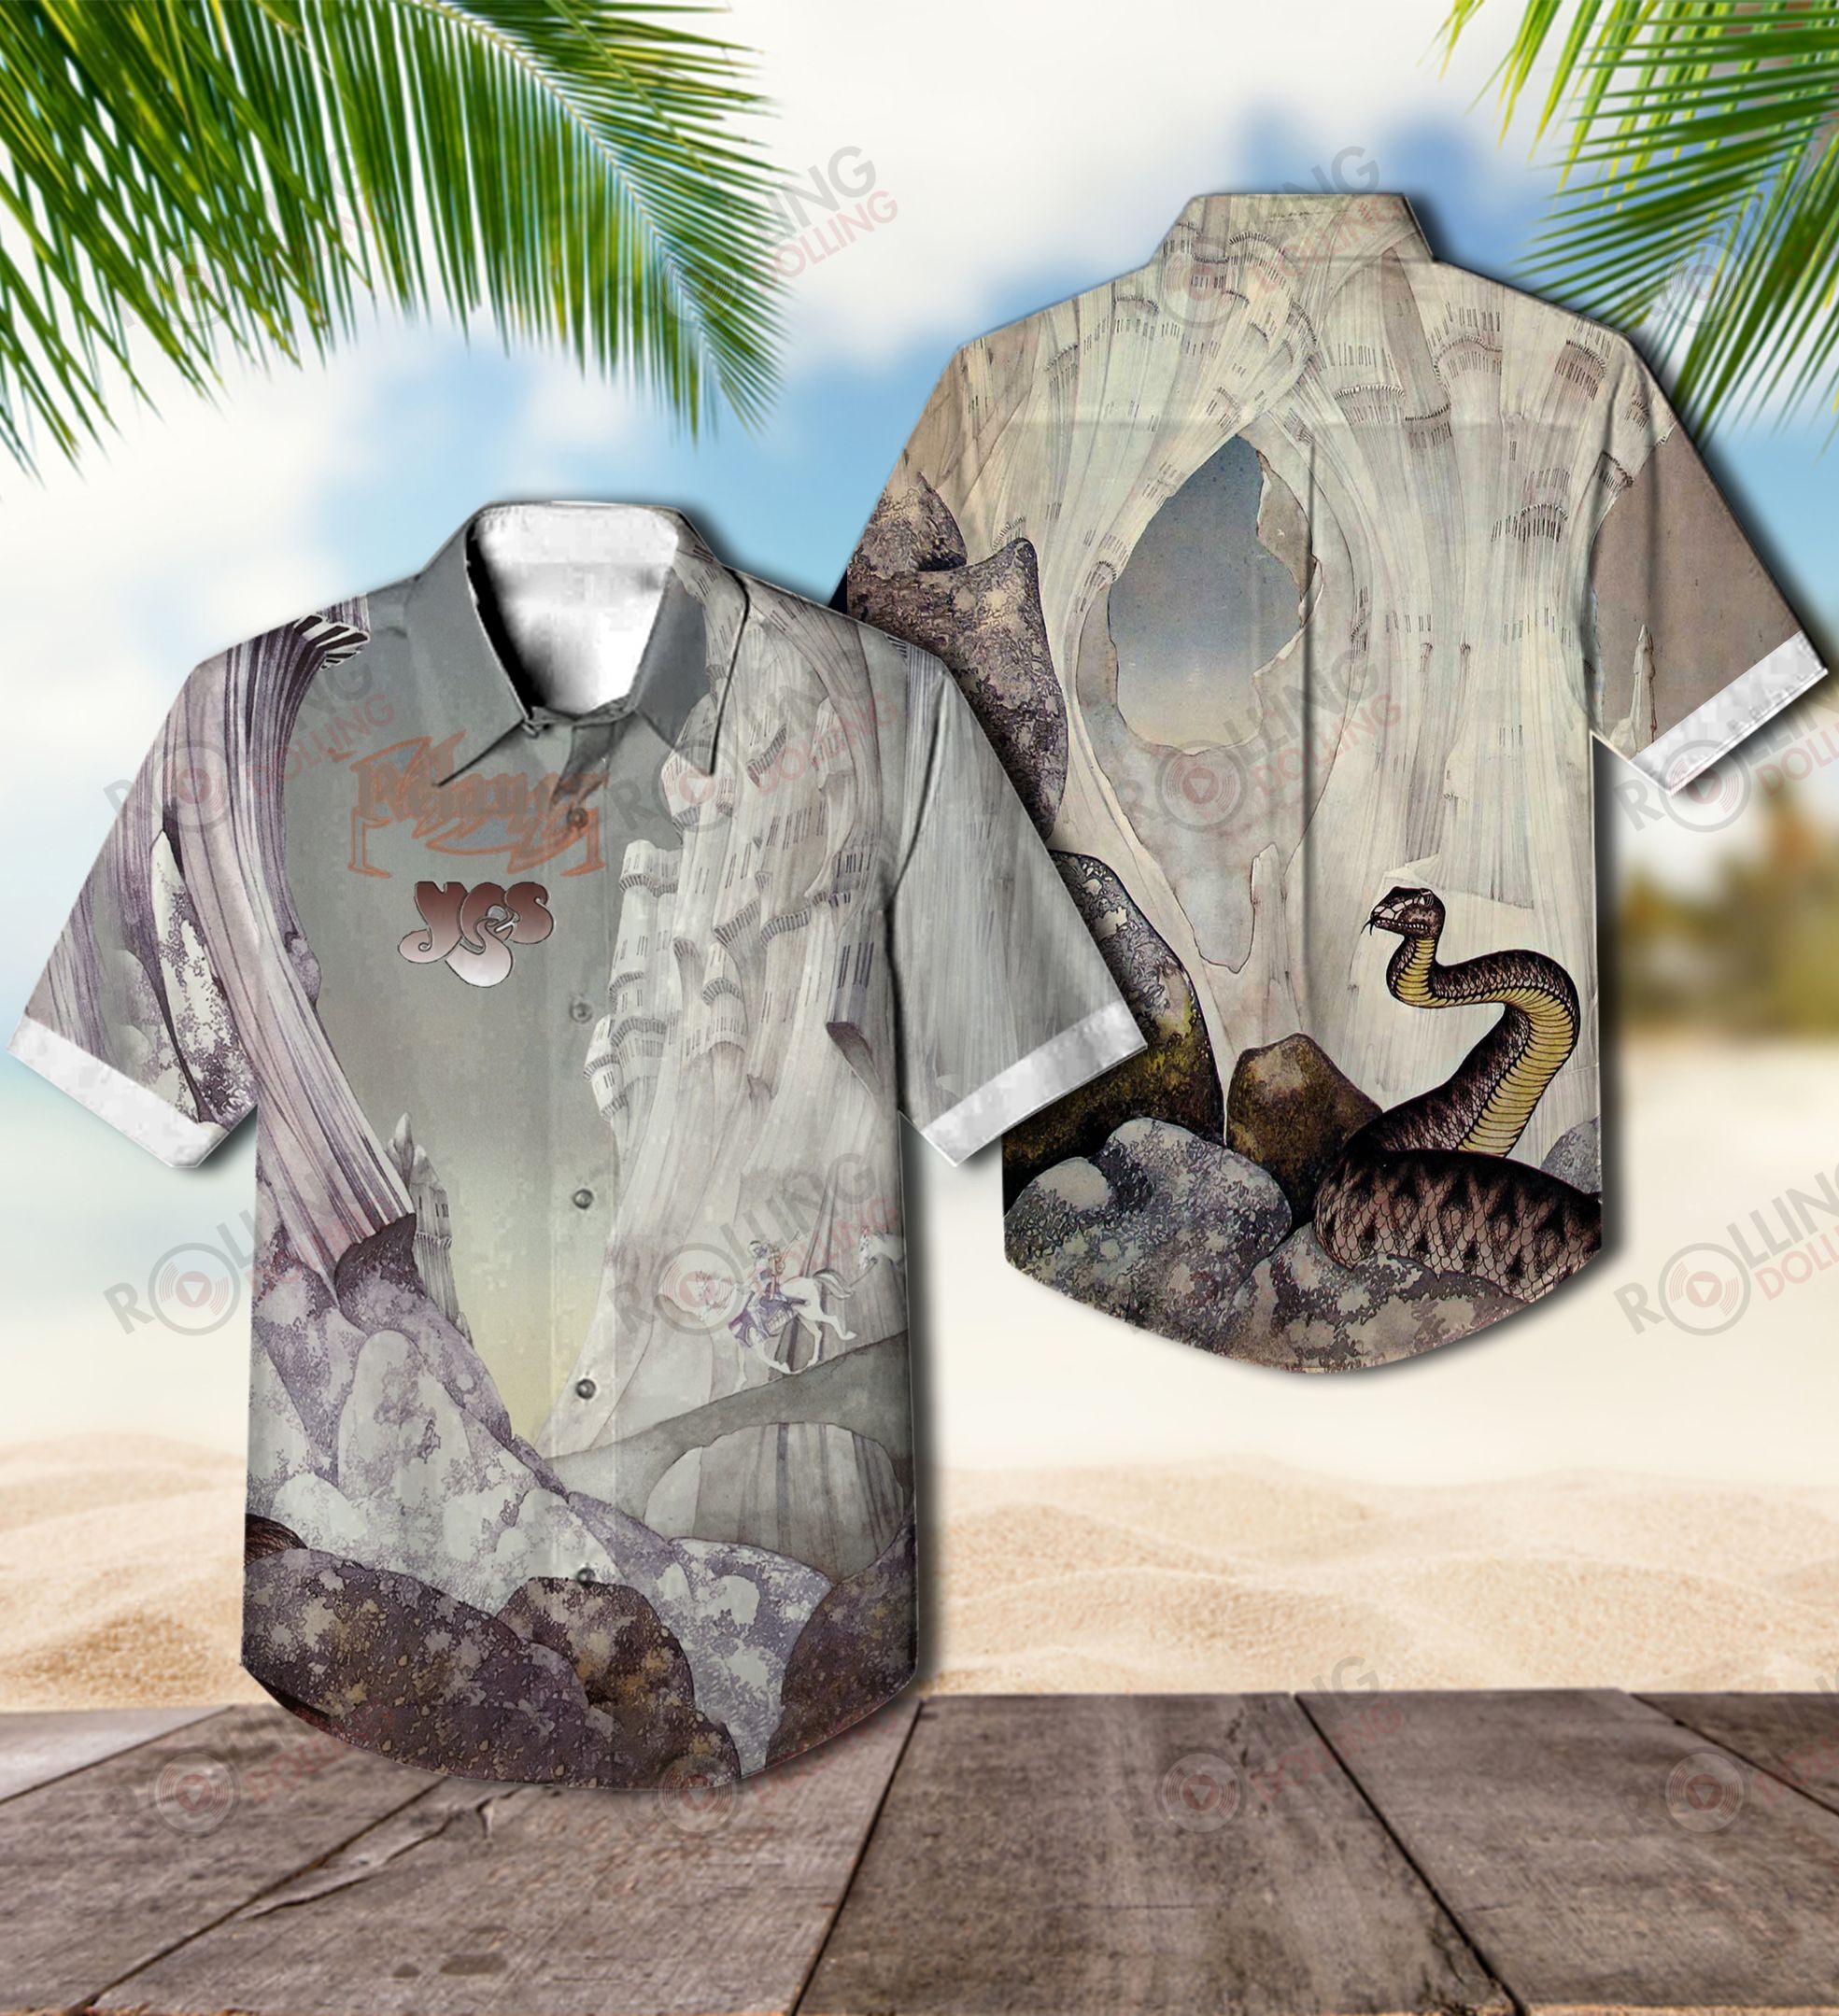 For summer, consider wearing This Amazing Hawaiian Shirt shirt in our store 178